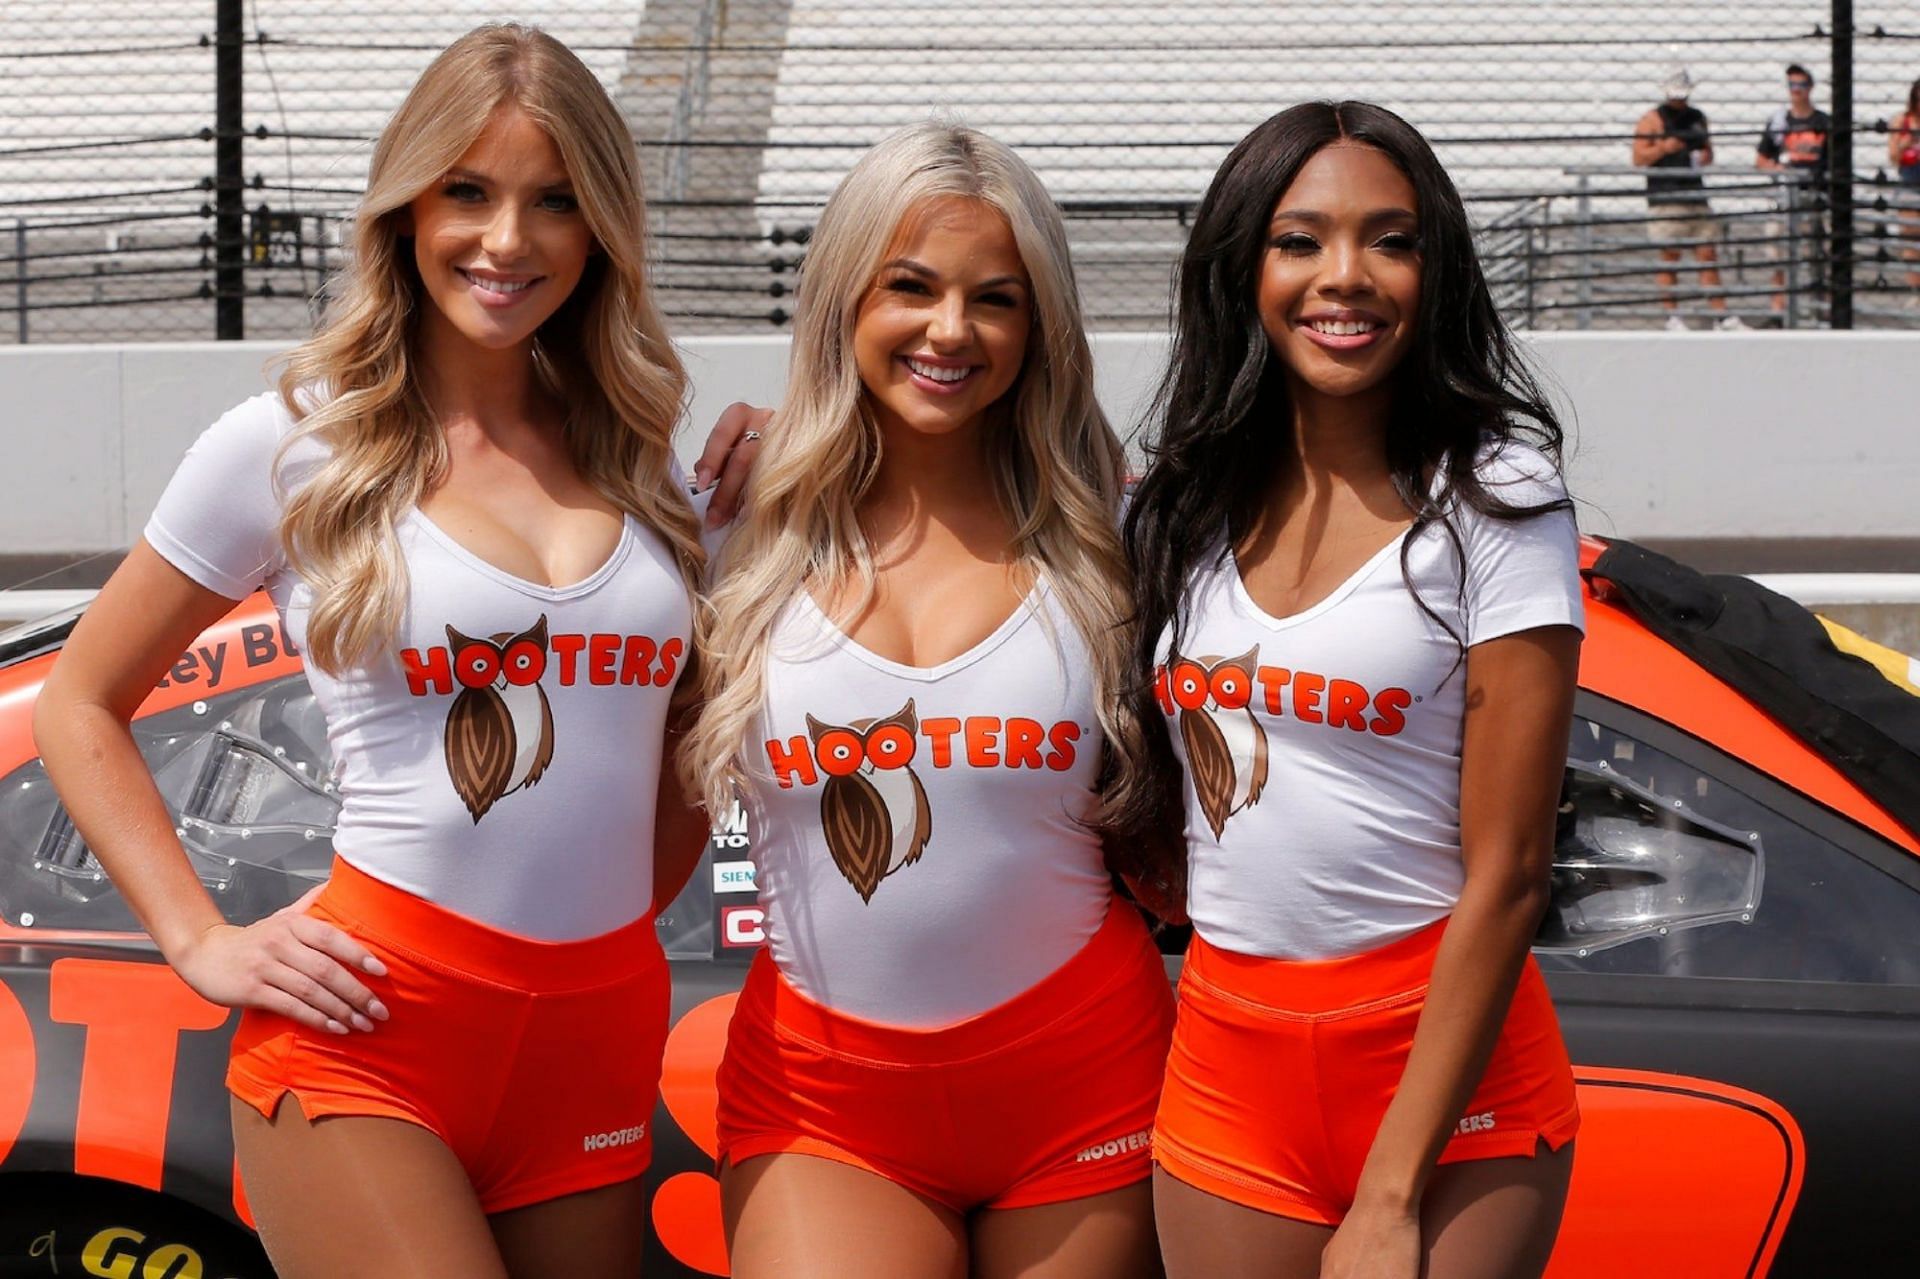 Rumors of Hooters shutting down send Twitter into a frenzy (Image via Getty Images)